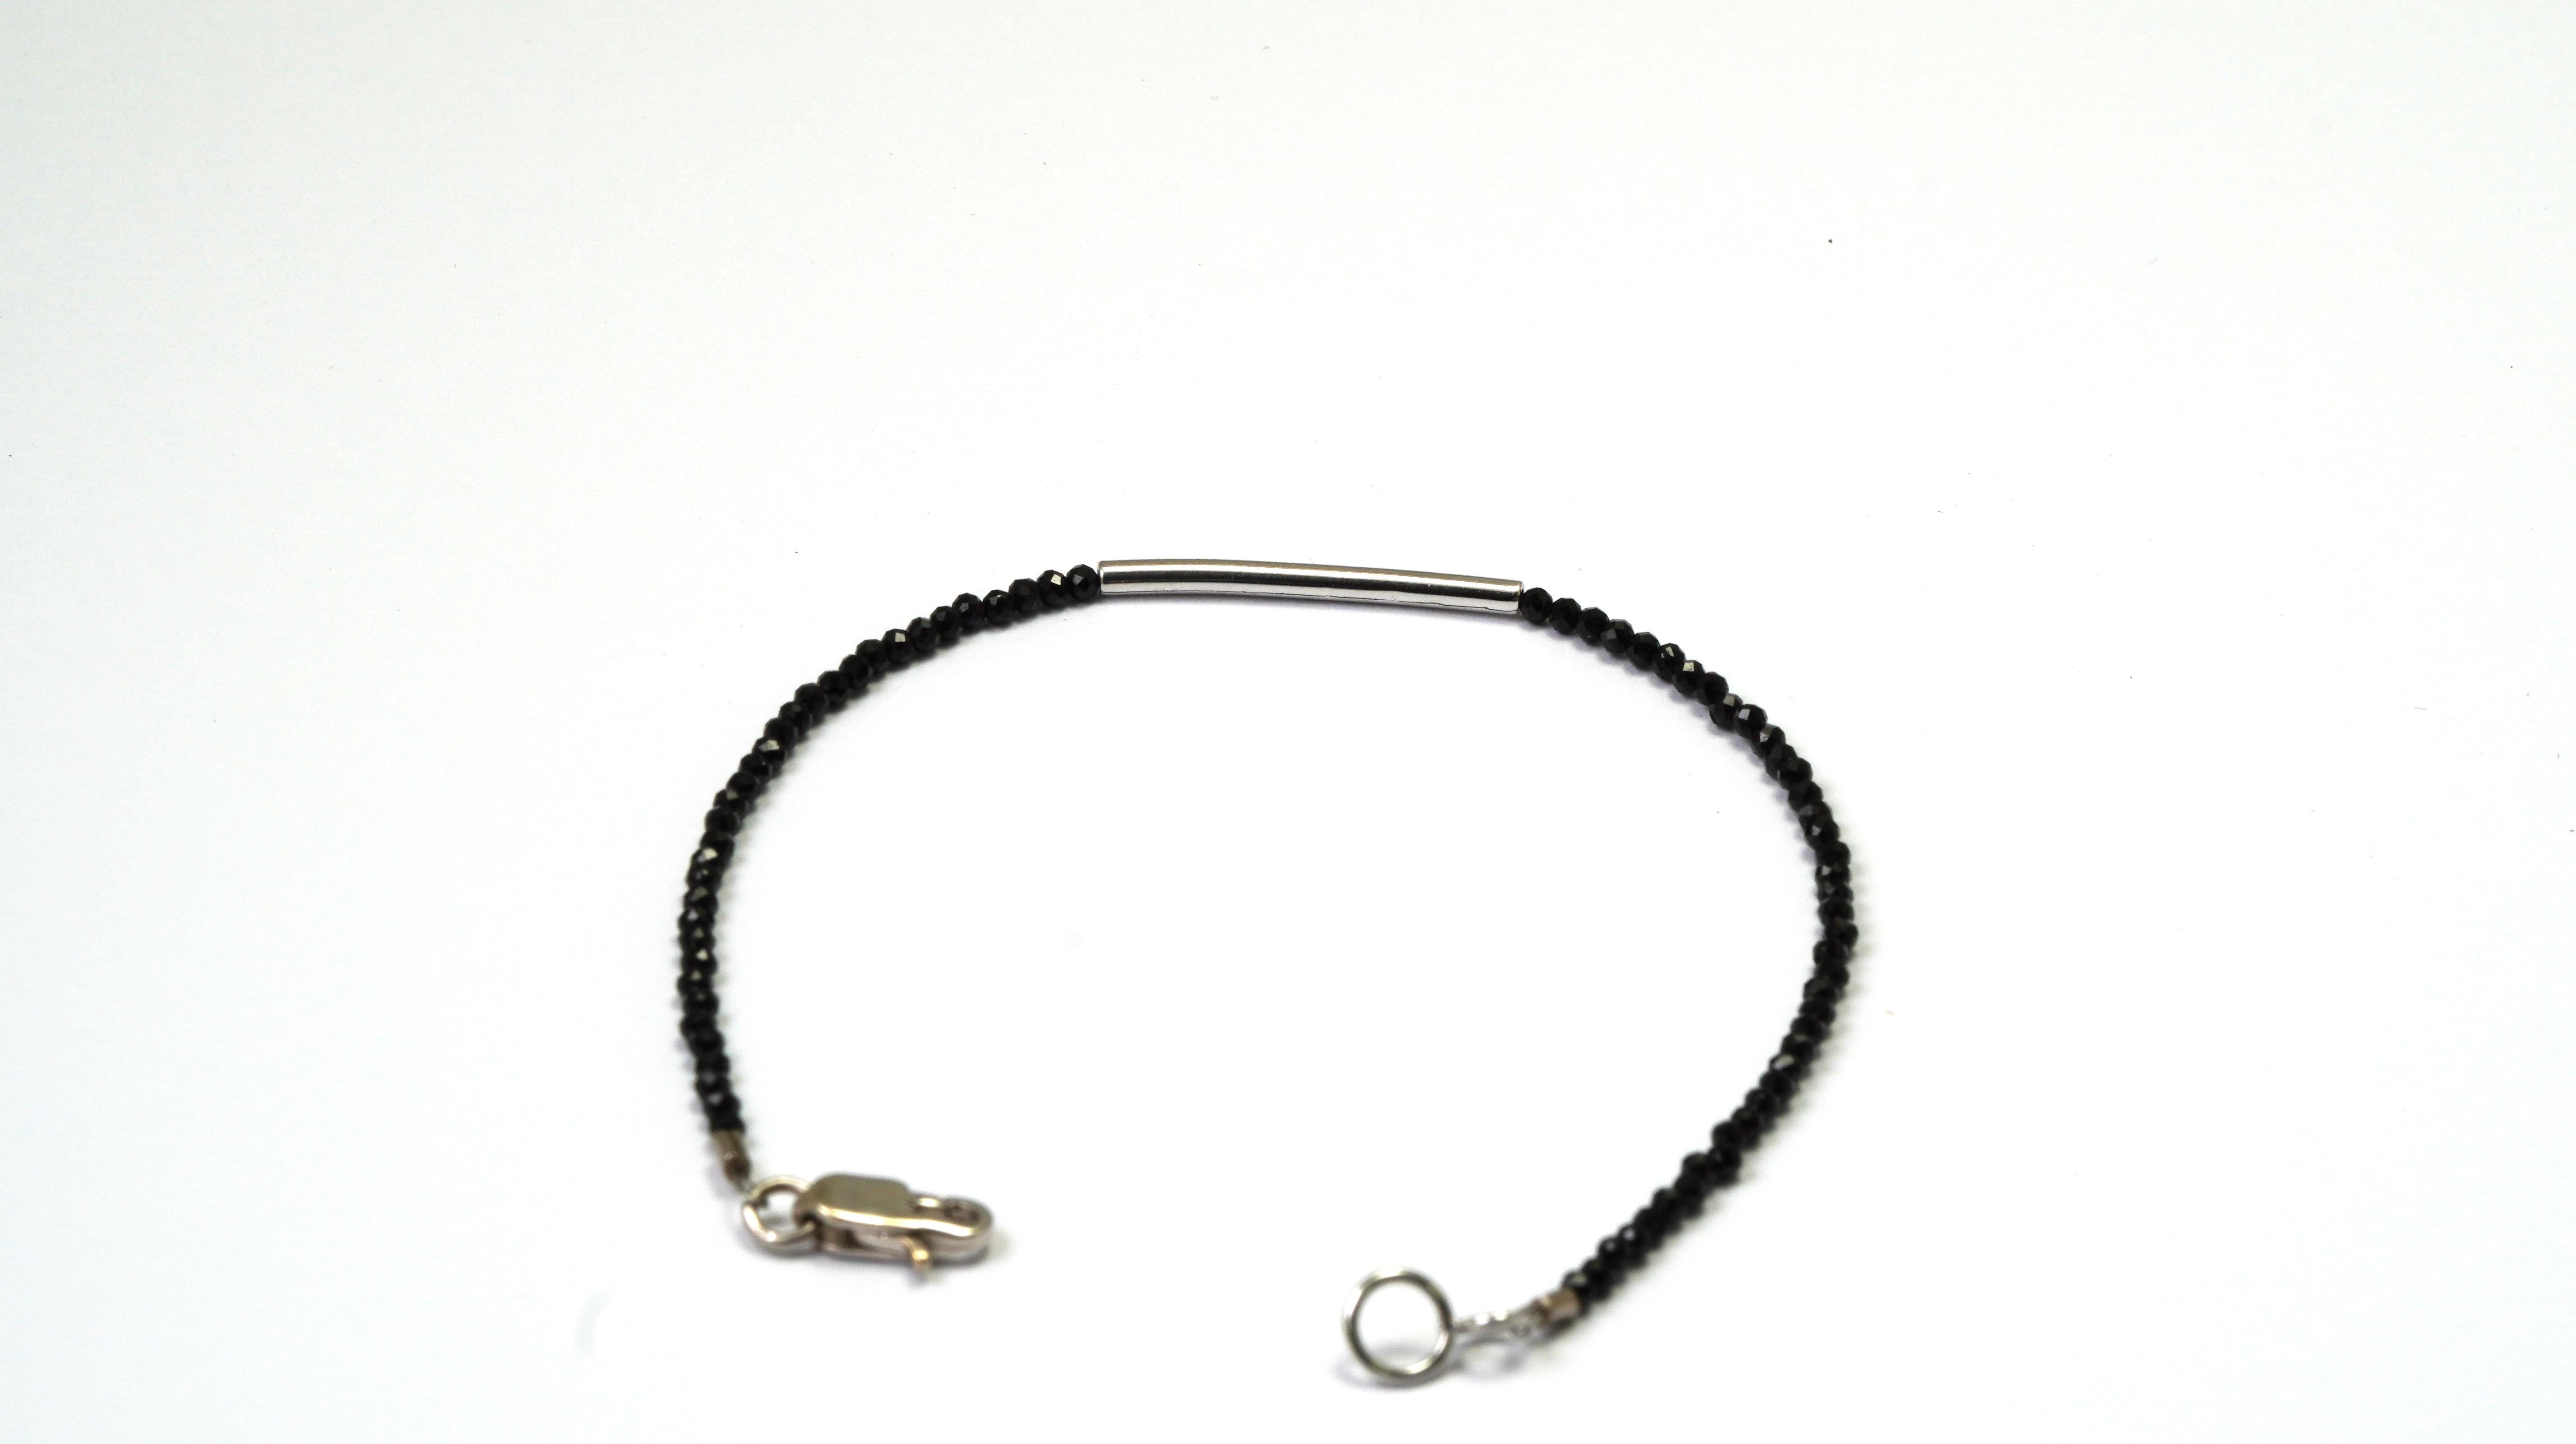 14 ct. White Gold Bracelet set with Black Spinel.
Gold Color: White
Dimensions: 17 cm (Lenght). 
Total weight: 2.00 grams 

Set with:
- Black Spinel
Cut: Ball Cut
Color: Black